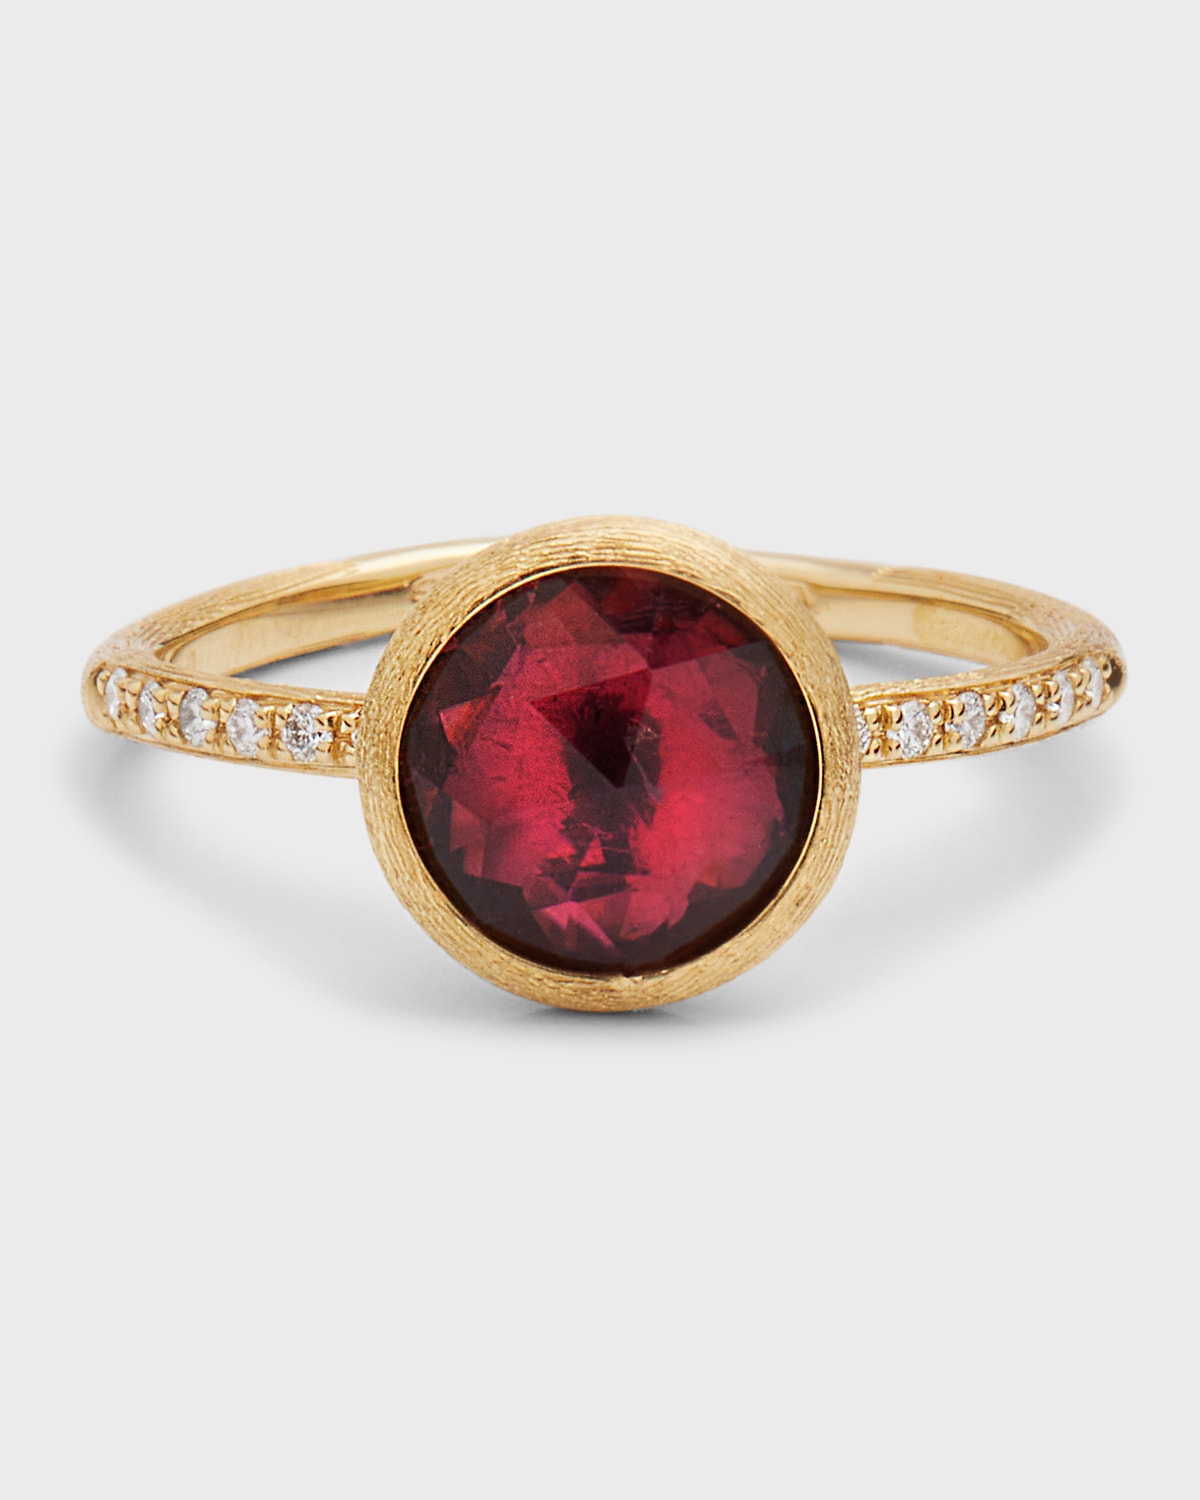 18K Yellow Gold Ring with Pink Tourmaline and Diamonds, Size 7